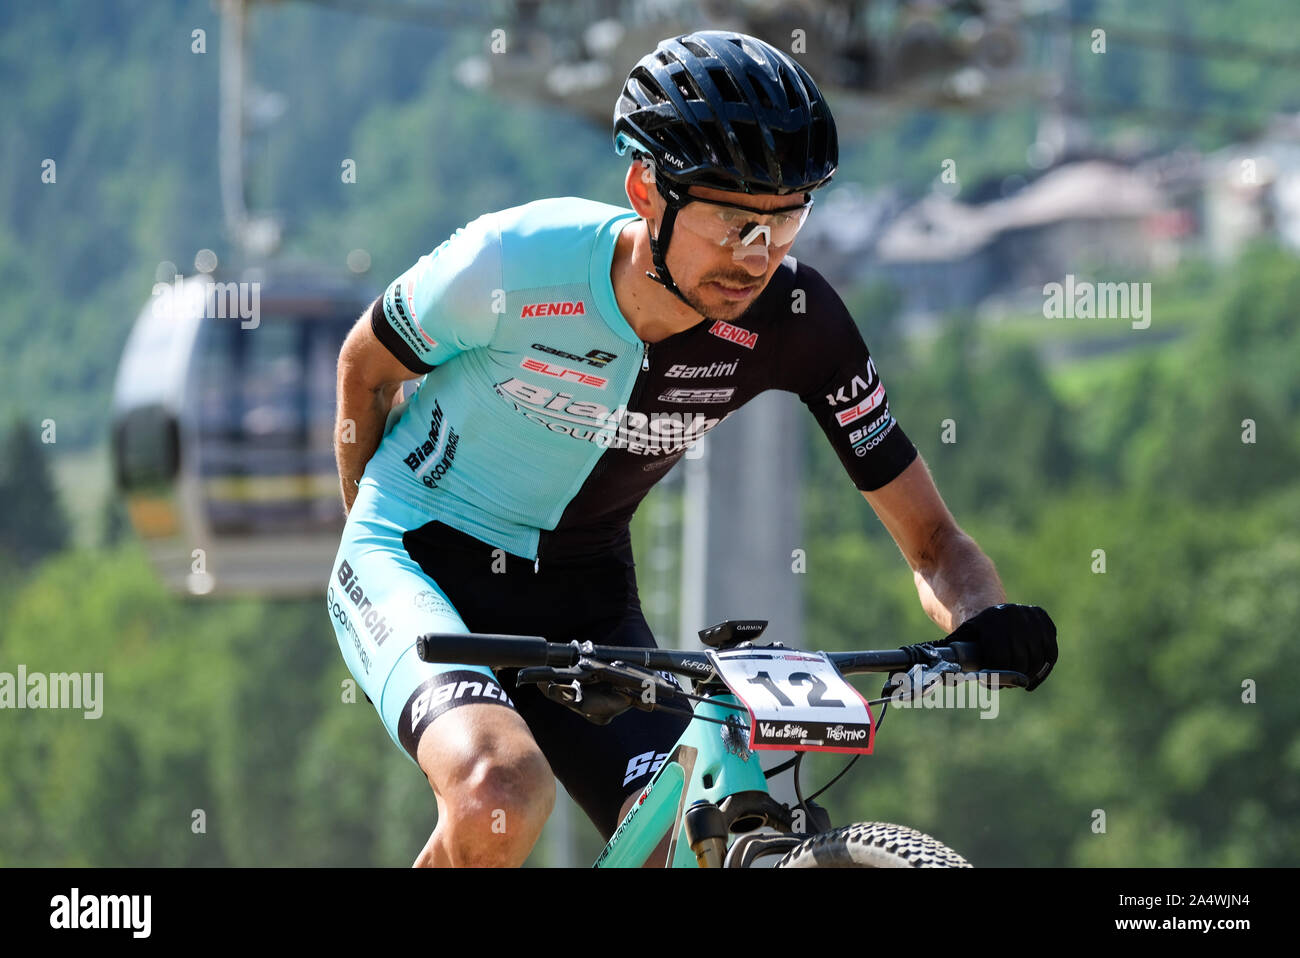 STEPHANE TEMPIER  during Cross-Country World Cup - Val di Sole UCI MTB - Men, Val di Sole, Italy, 04 Aug 2019, Cycling MTB - Mountain Bike Stock Photo